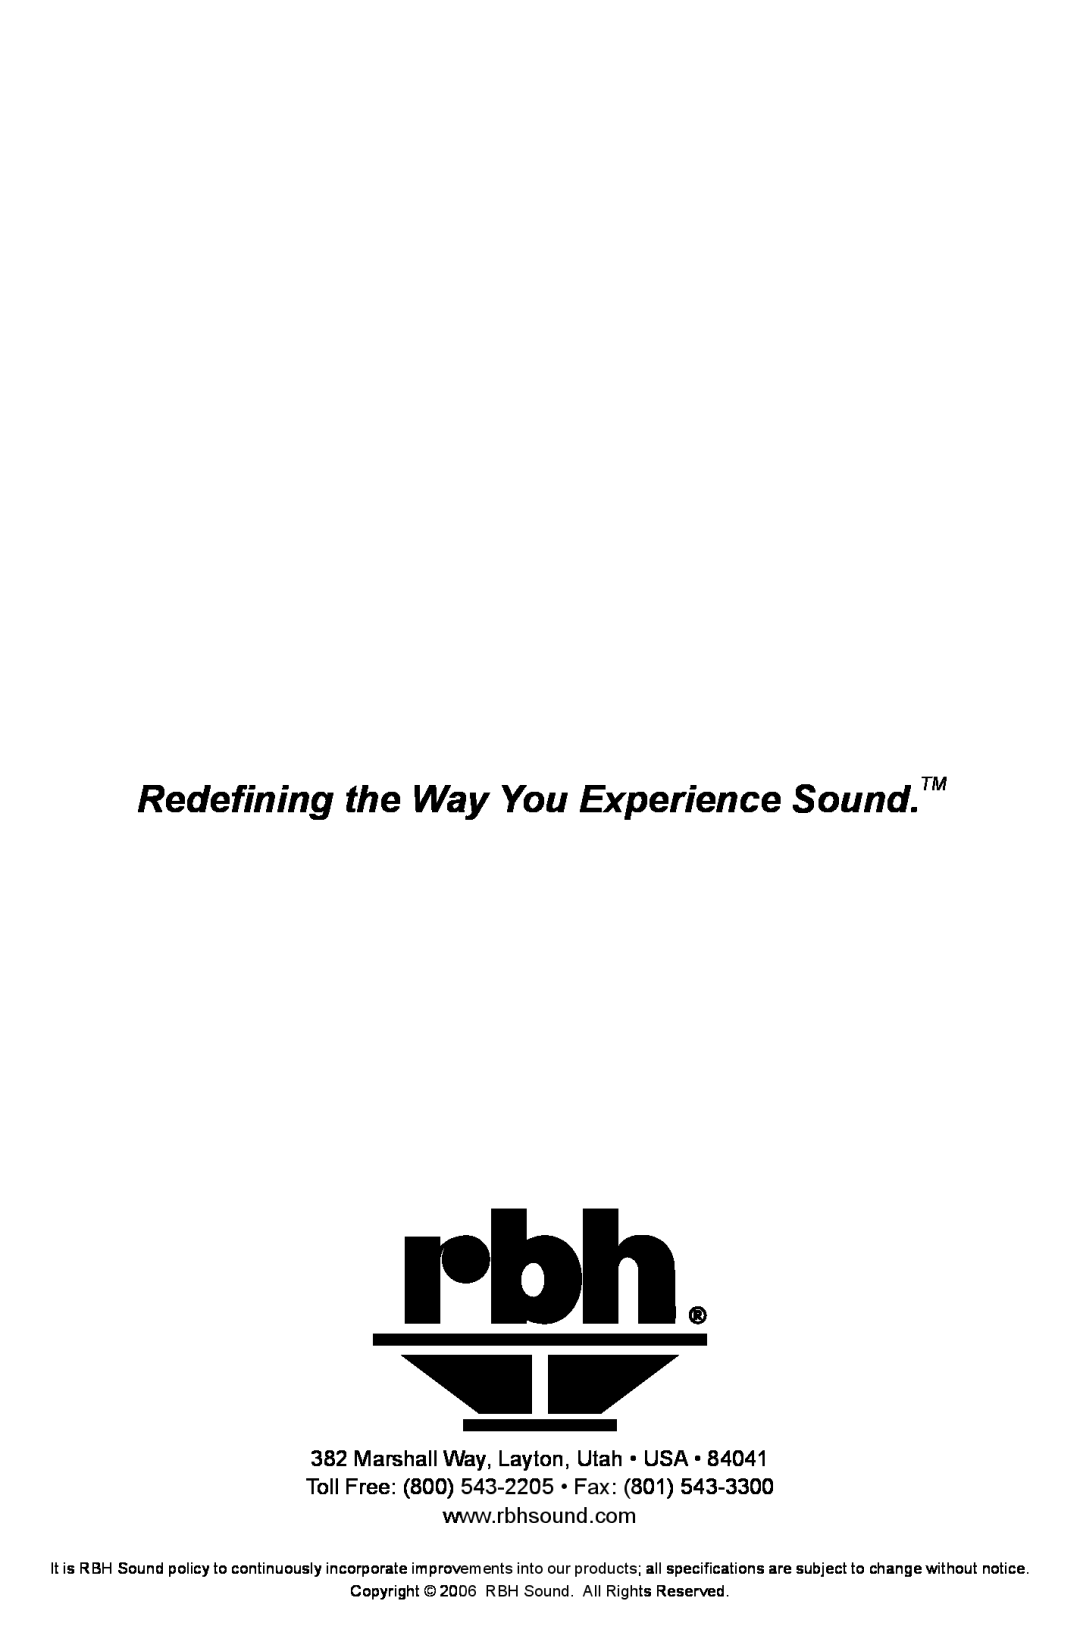 RBH Sound TK Series Redefining the Way You Experience Sound.TM, Copyright 2006 RBH Sound. All Rights Reserved 